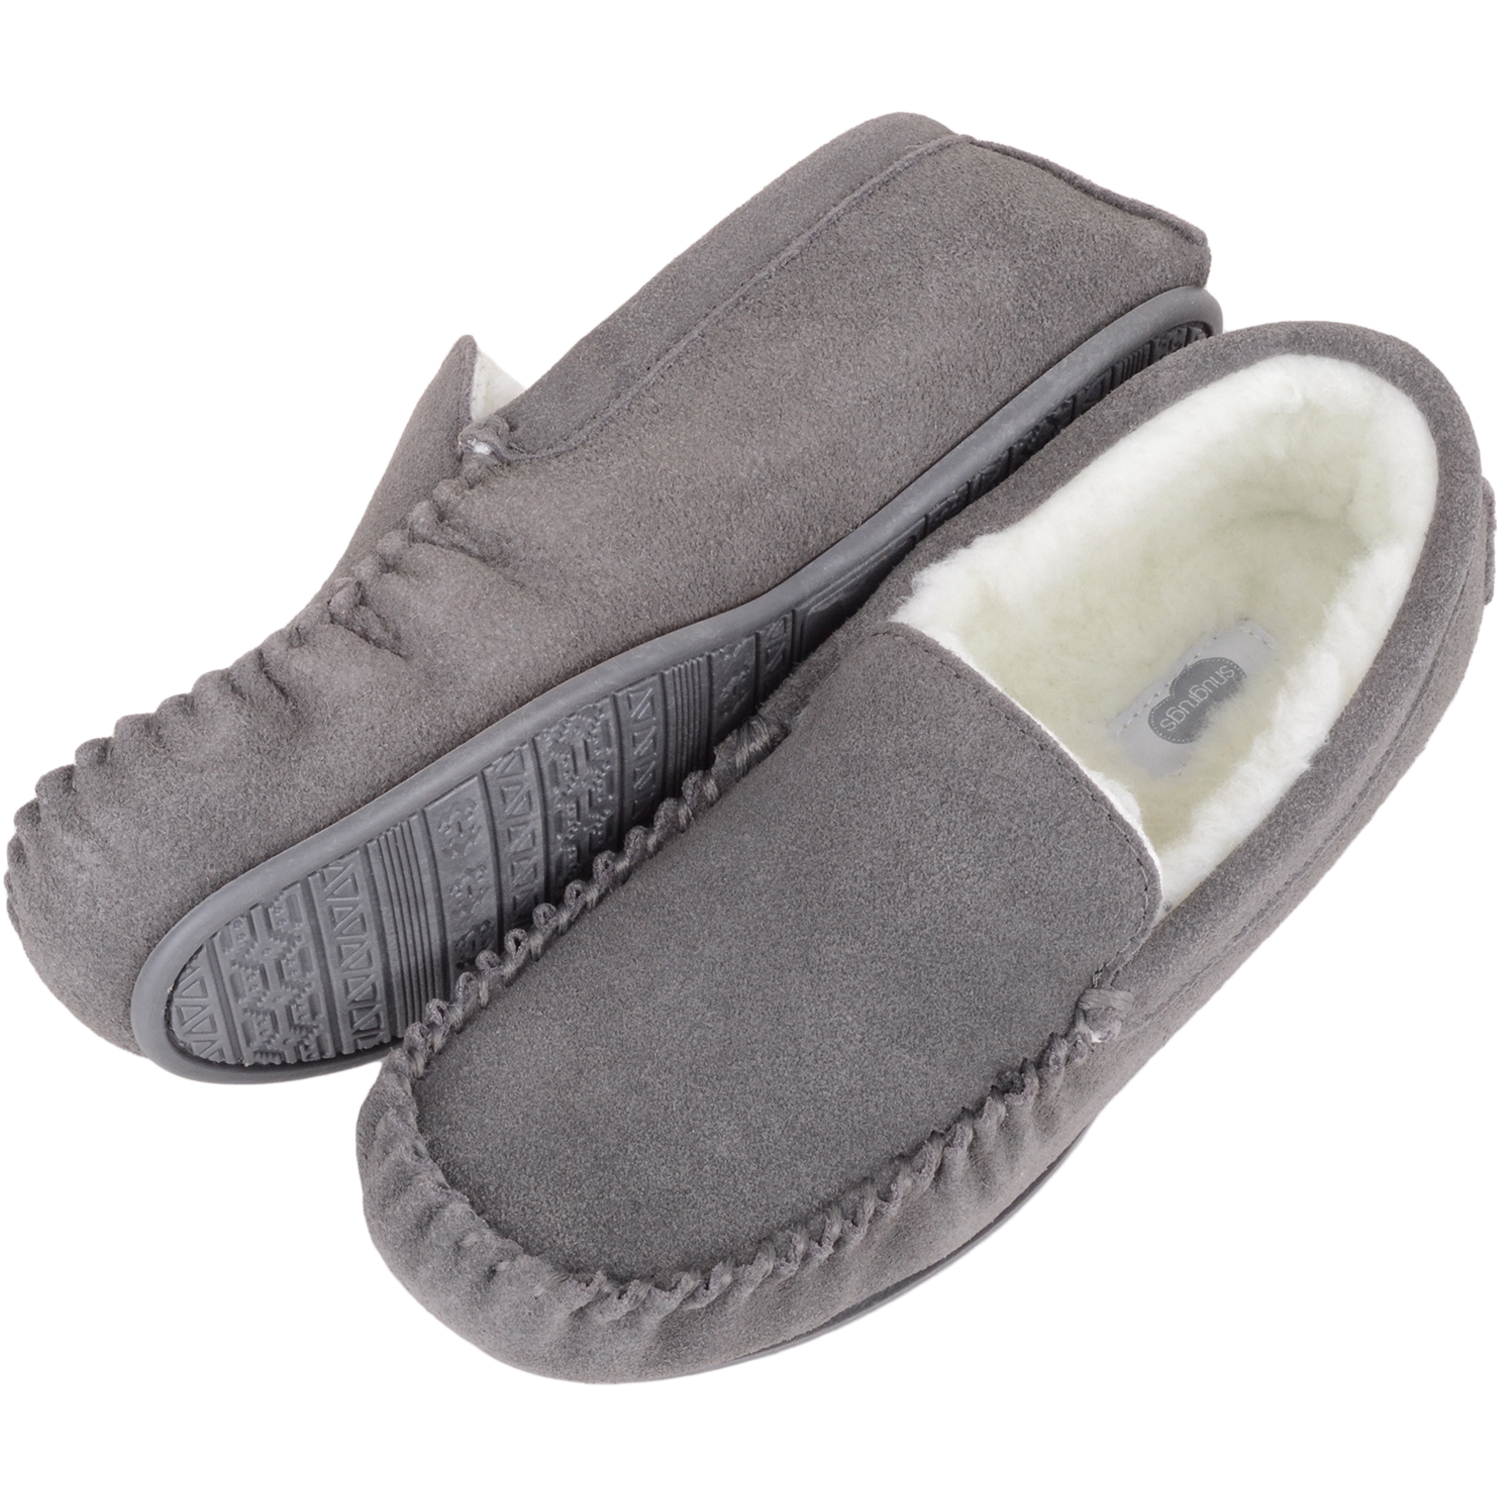 SNUGRUGS Ladies/Womens Soft Suede Moccasins/Slippers with Beautiful Cotton Lining 